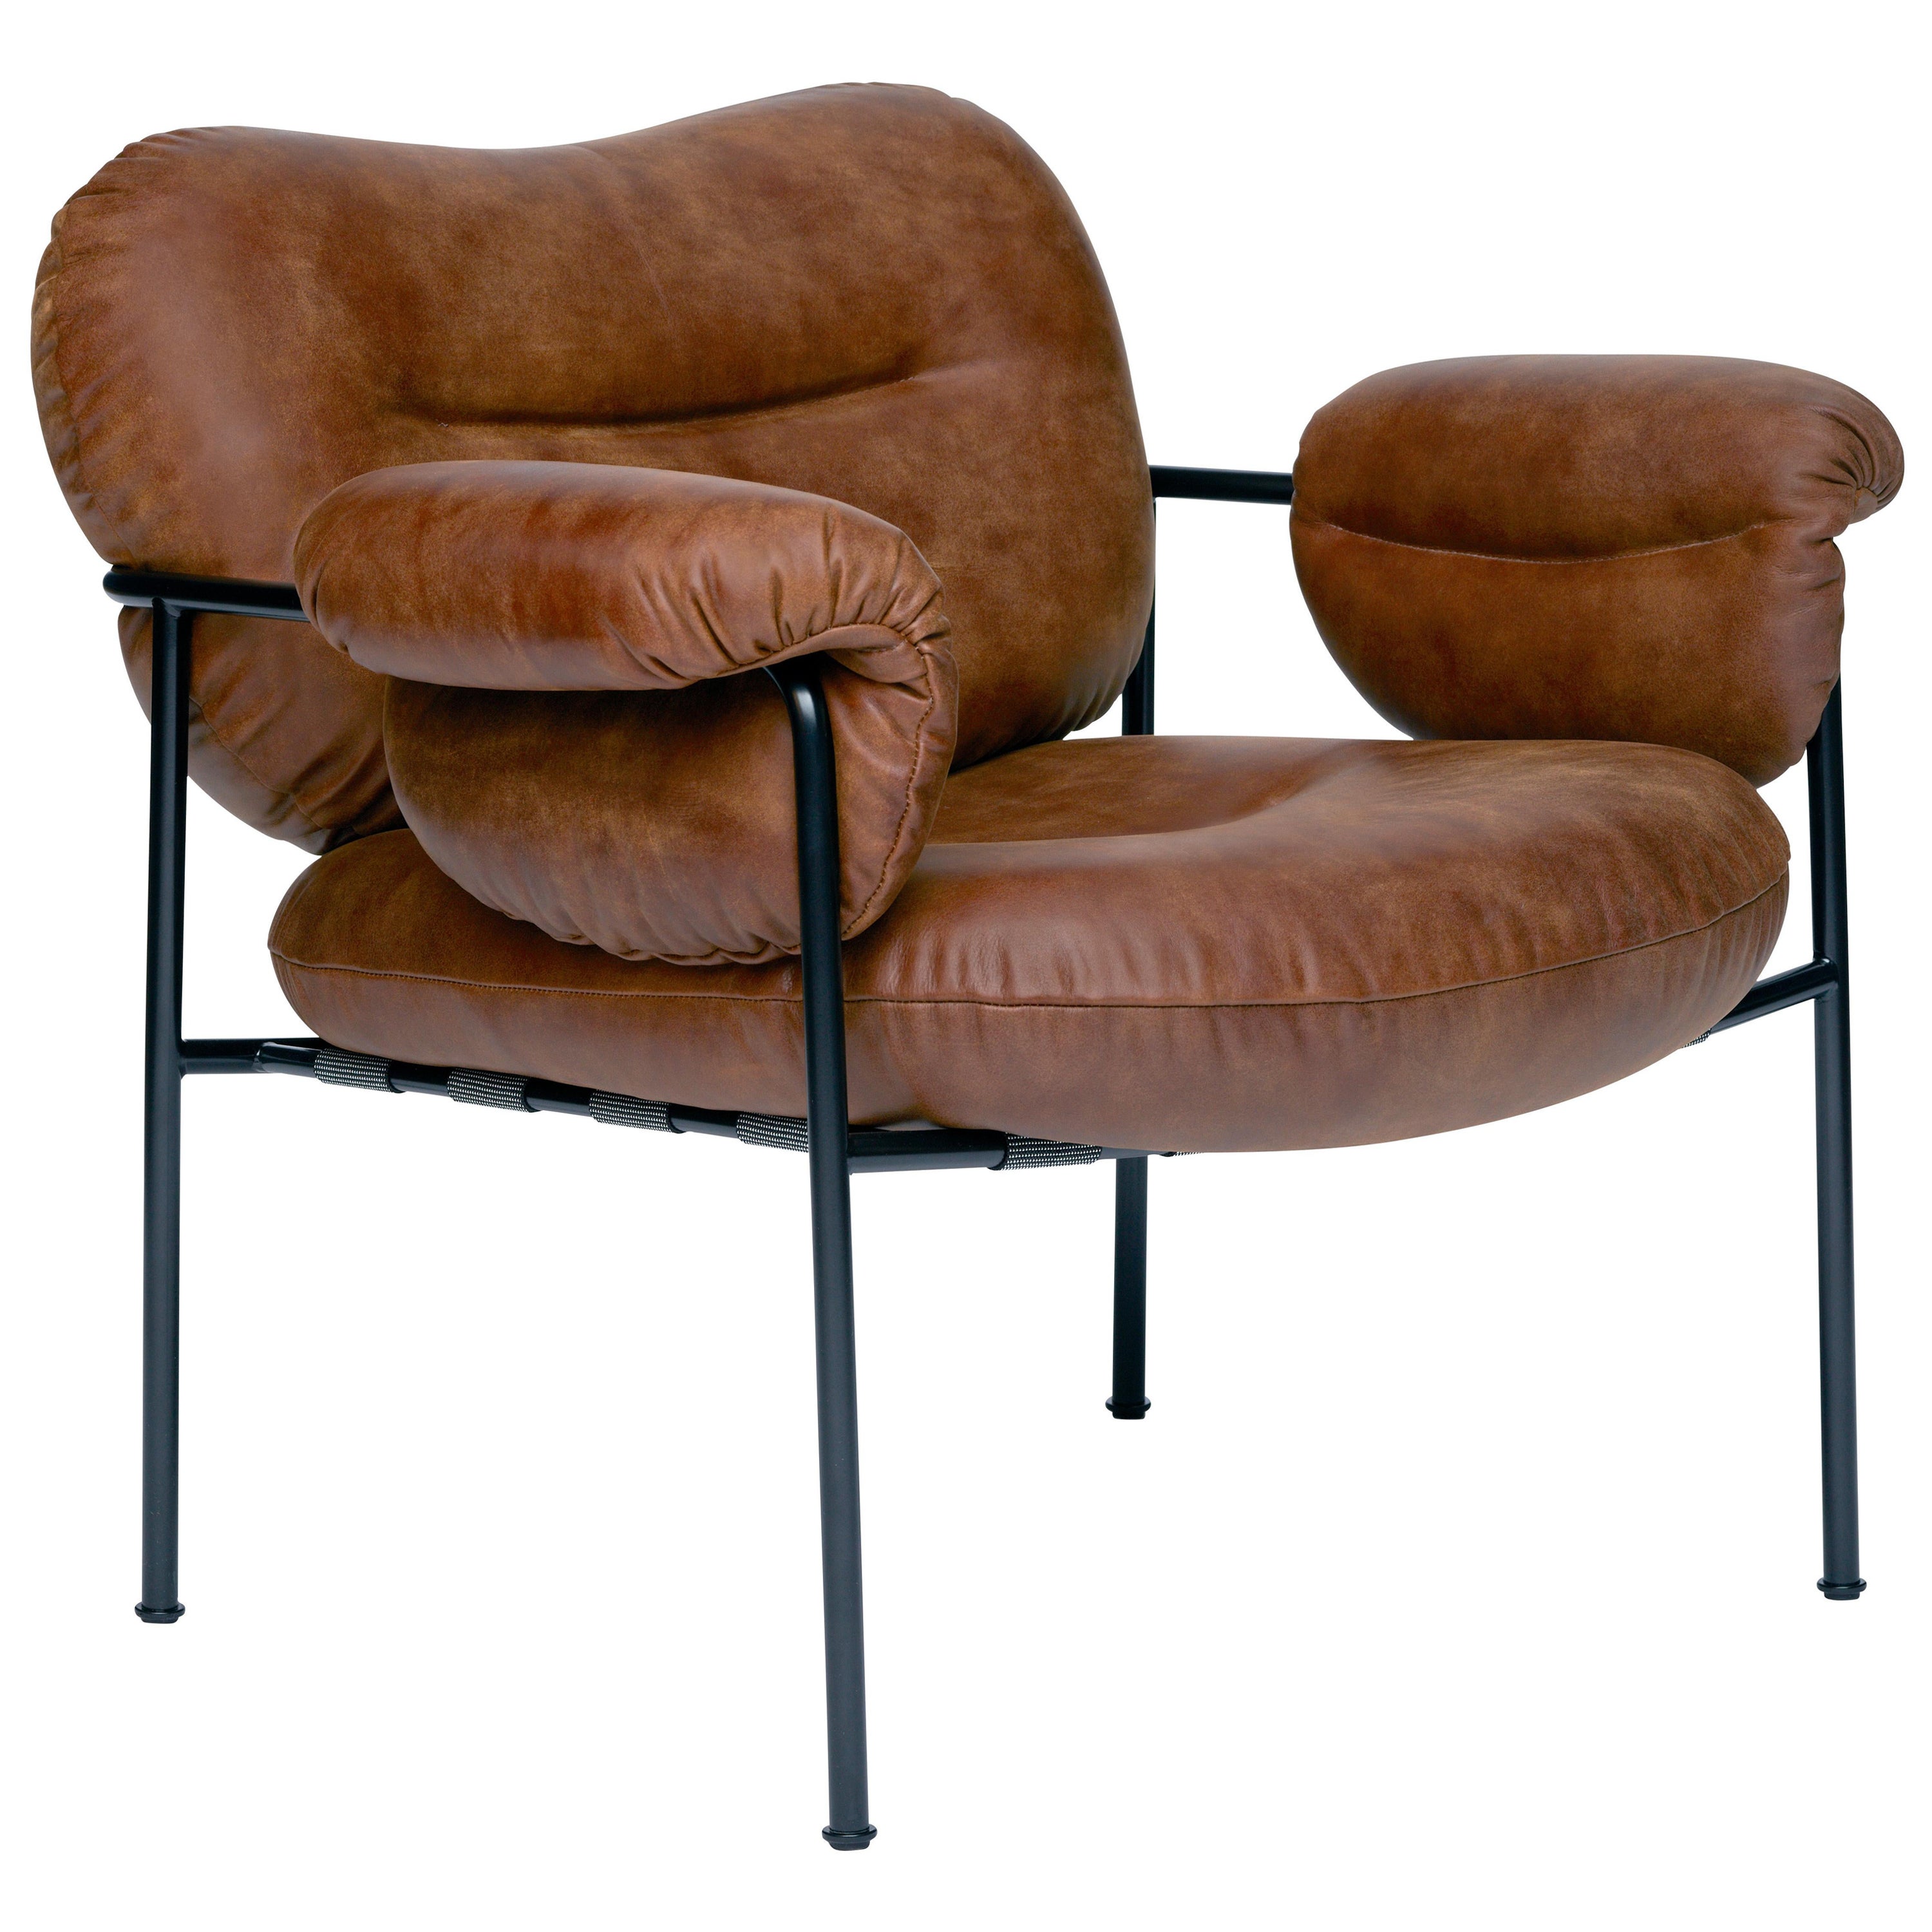 Bollo Armchair by Fogia, Brown Leather, Black Steel For Sale